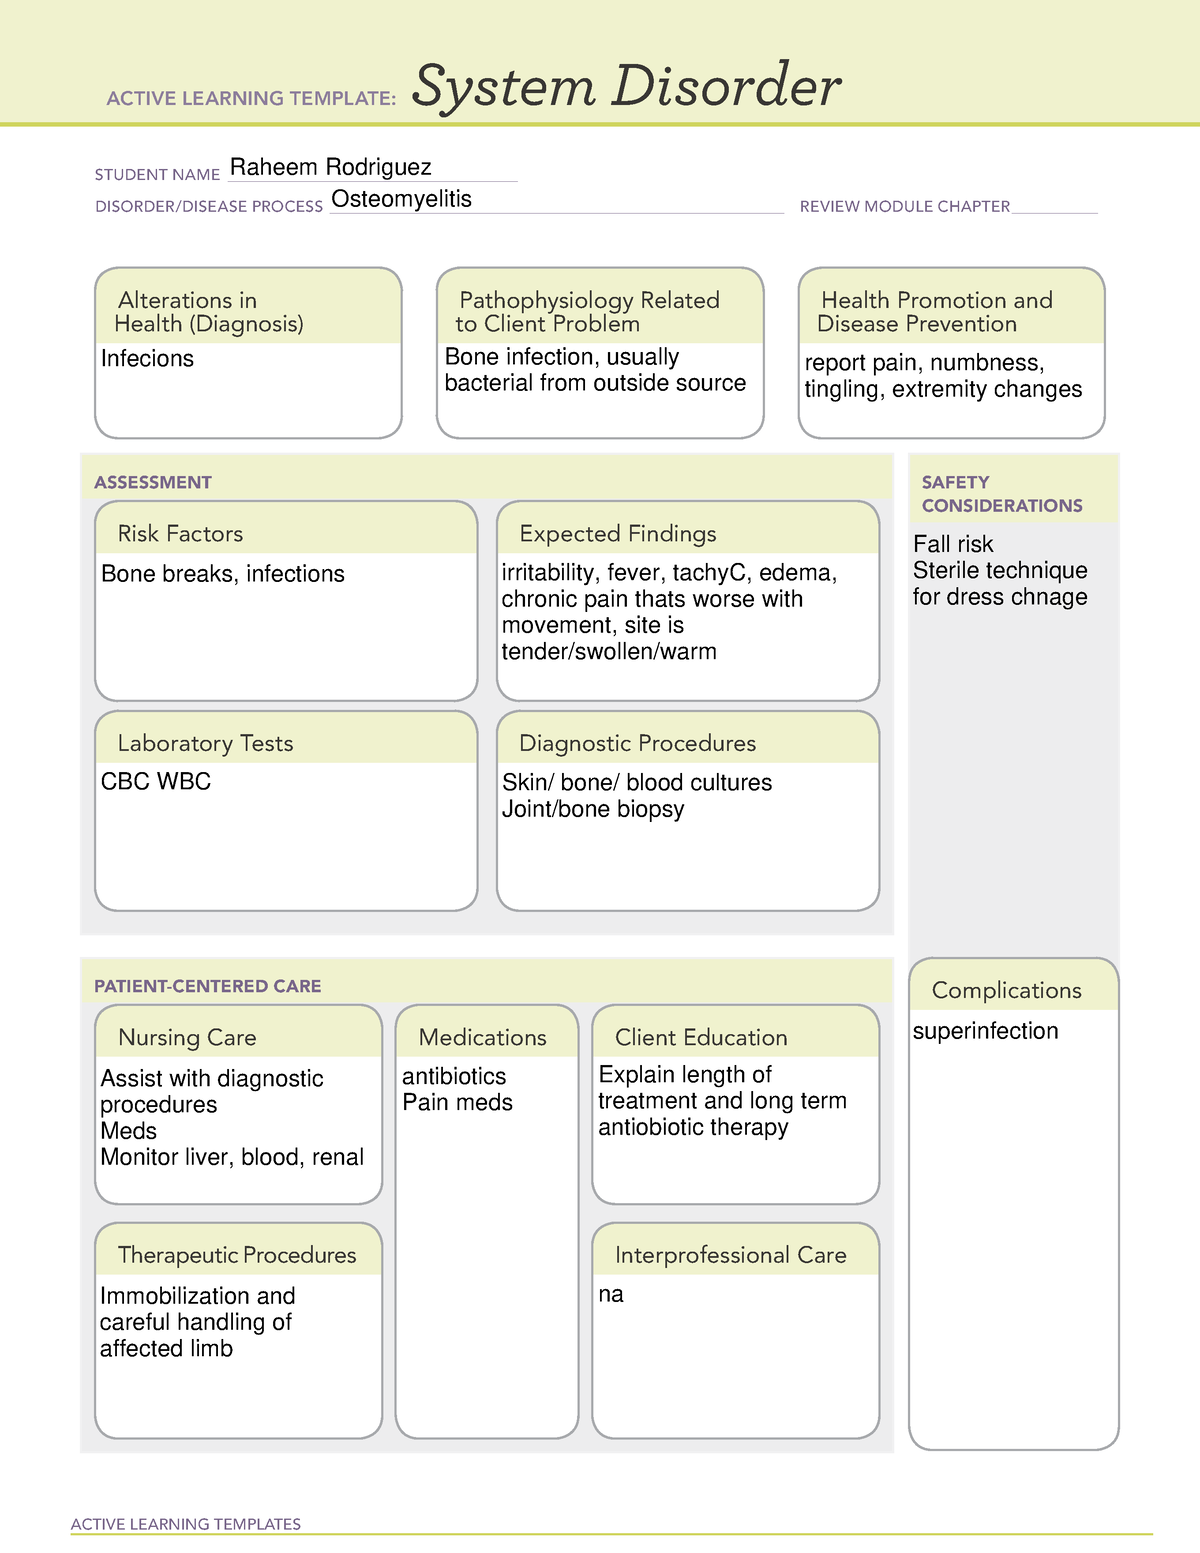 ATI system disorder template Osteomyelitis - ACTIVE LEARNING TEMPLATES ...